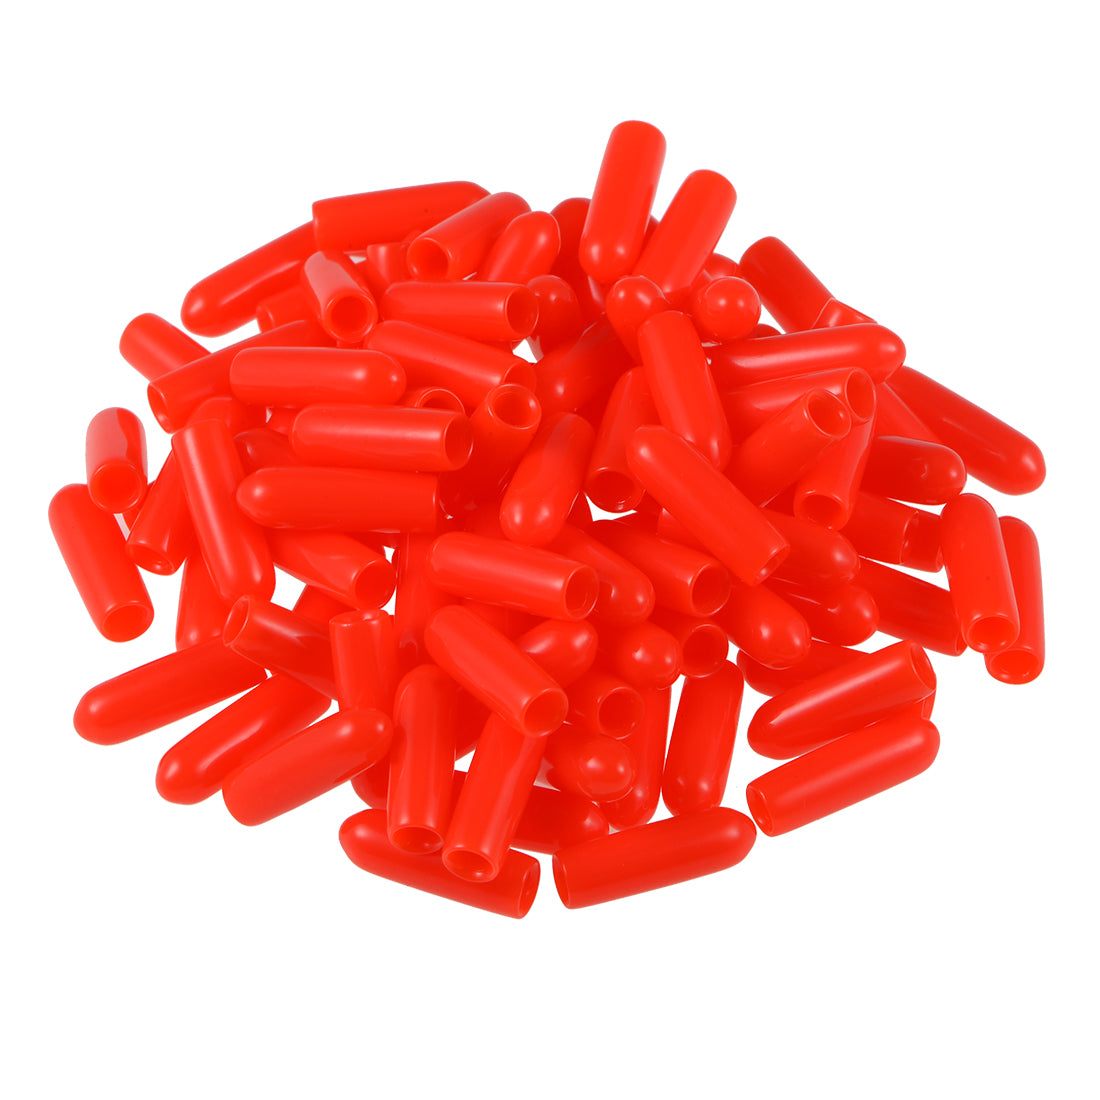 uxcell Uxcell 200pcs Rubber End Caps 3mm ID 15mm Height Screw Thread Protectors Red